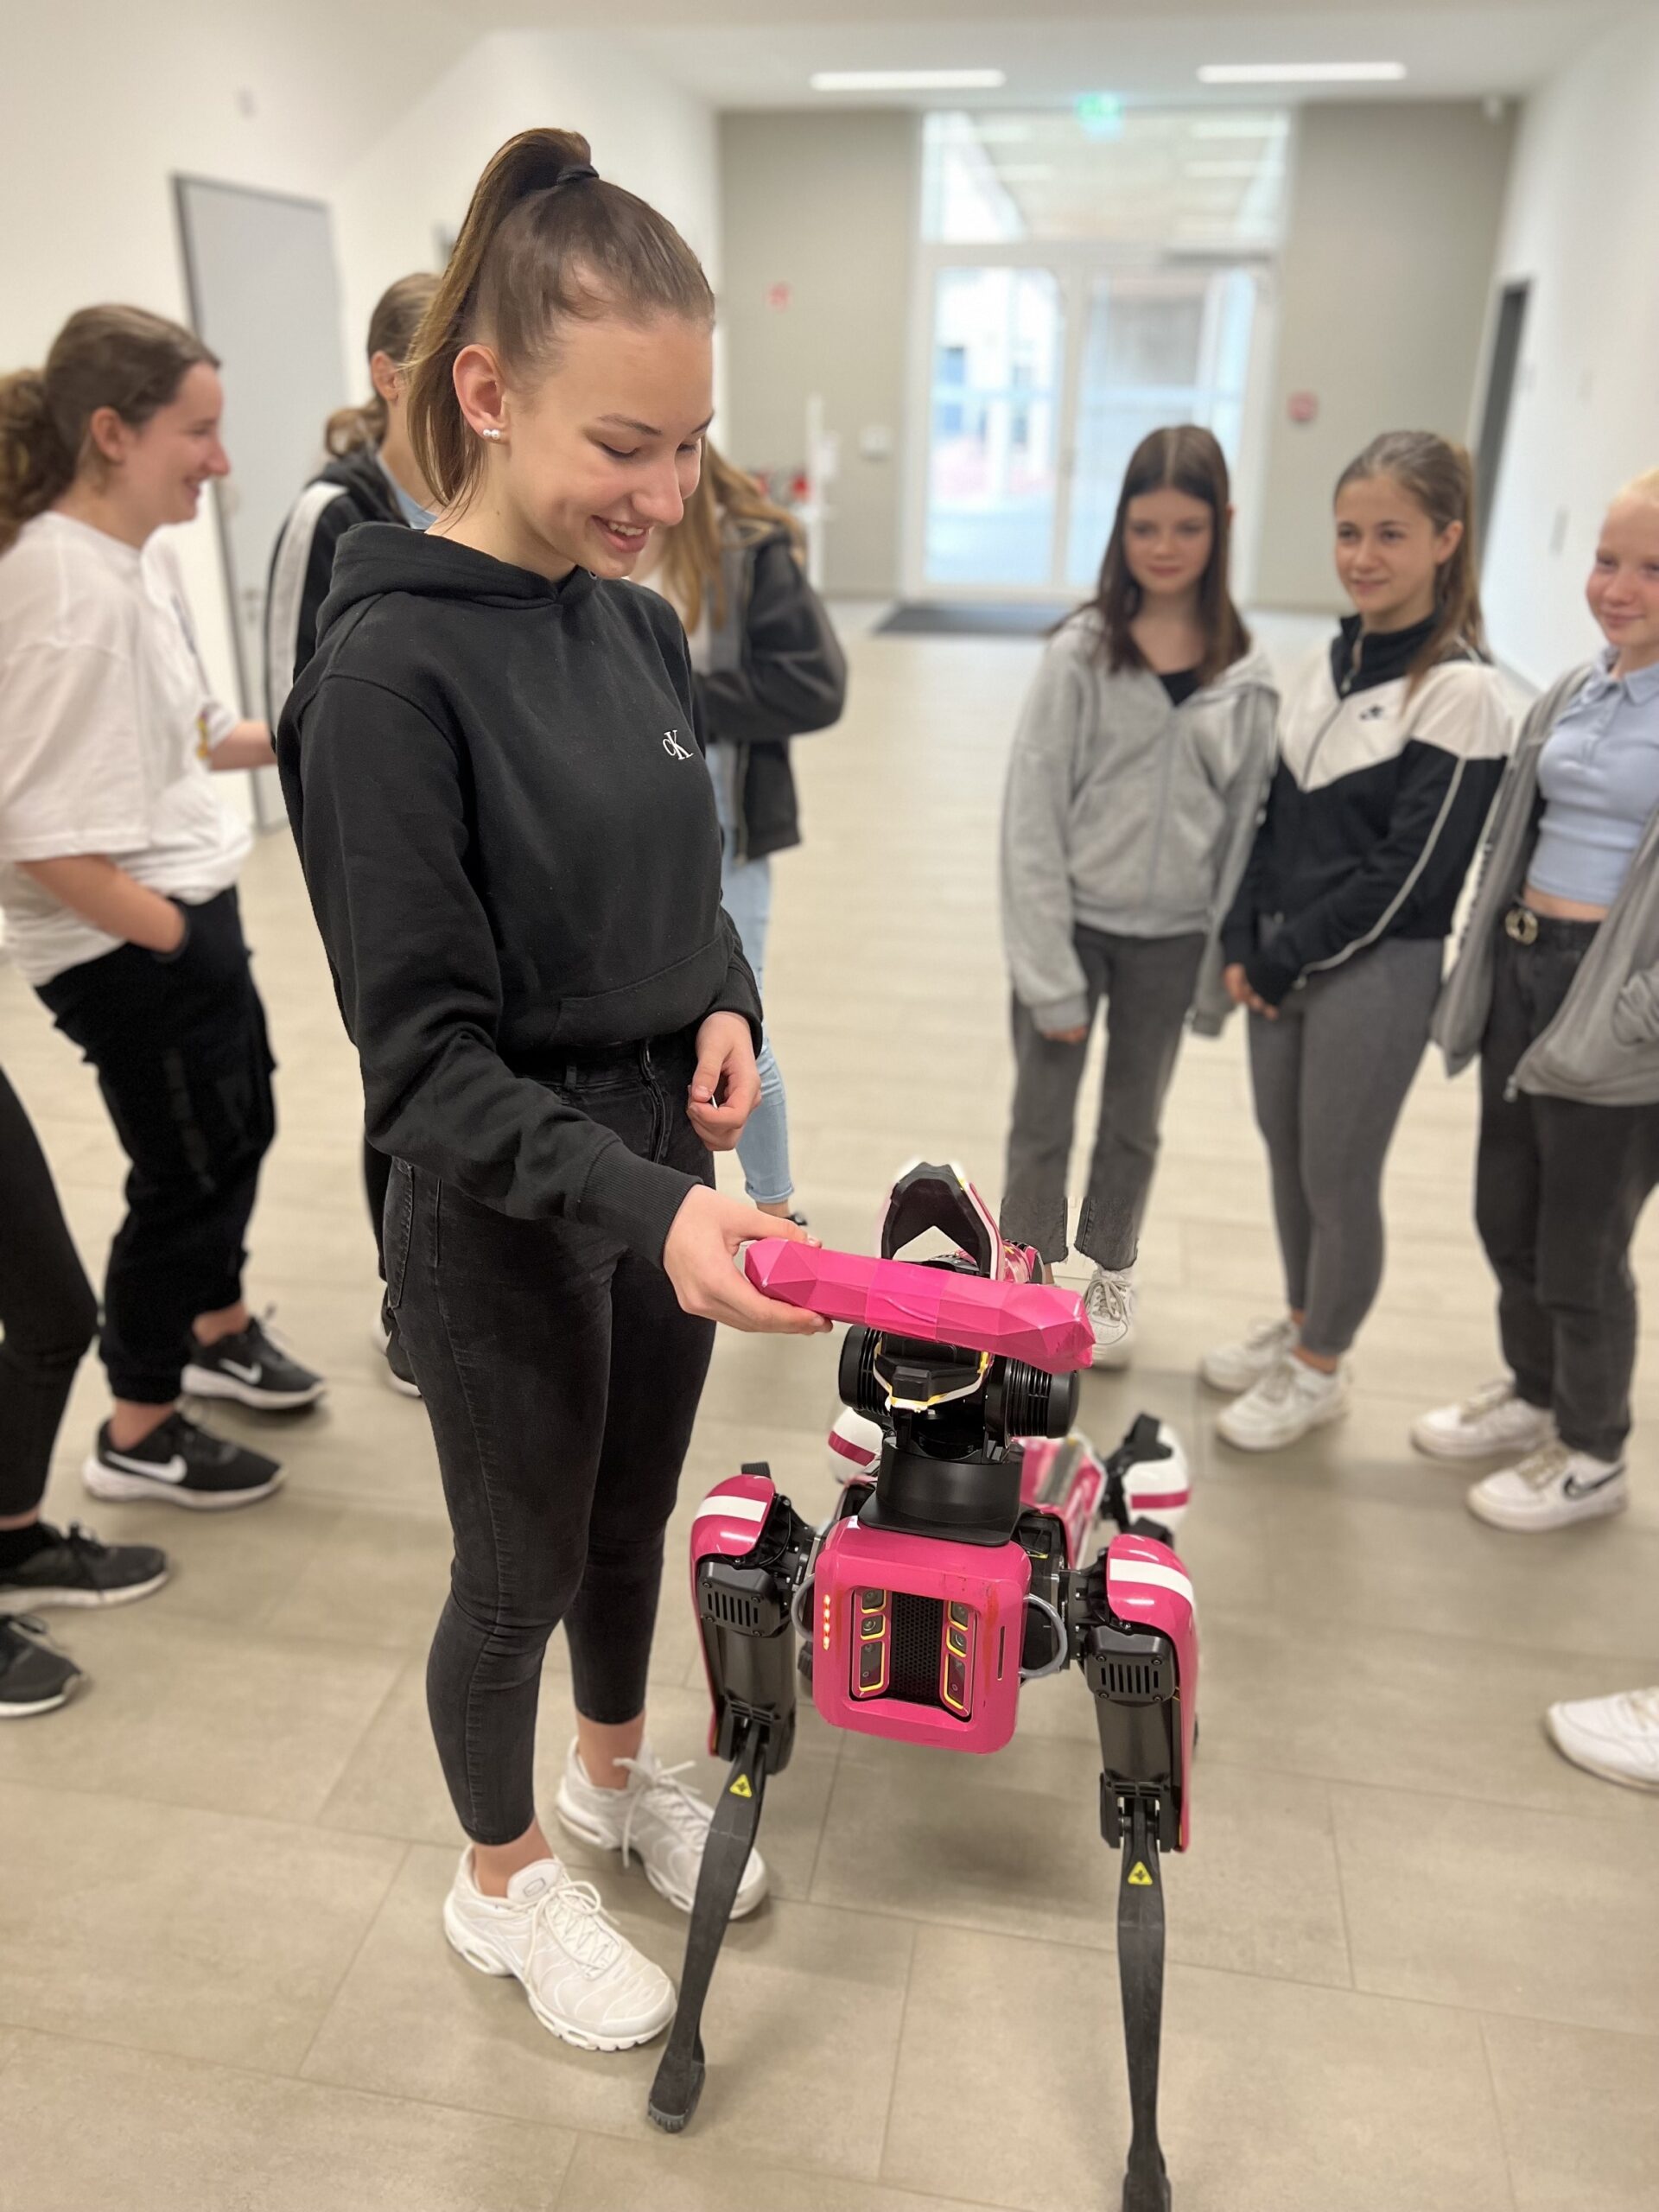 Picture of a group of girls near a robotic dog